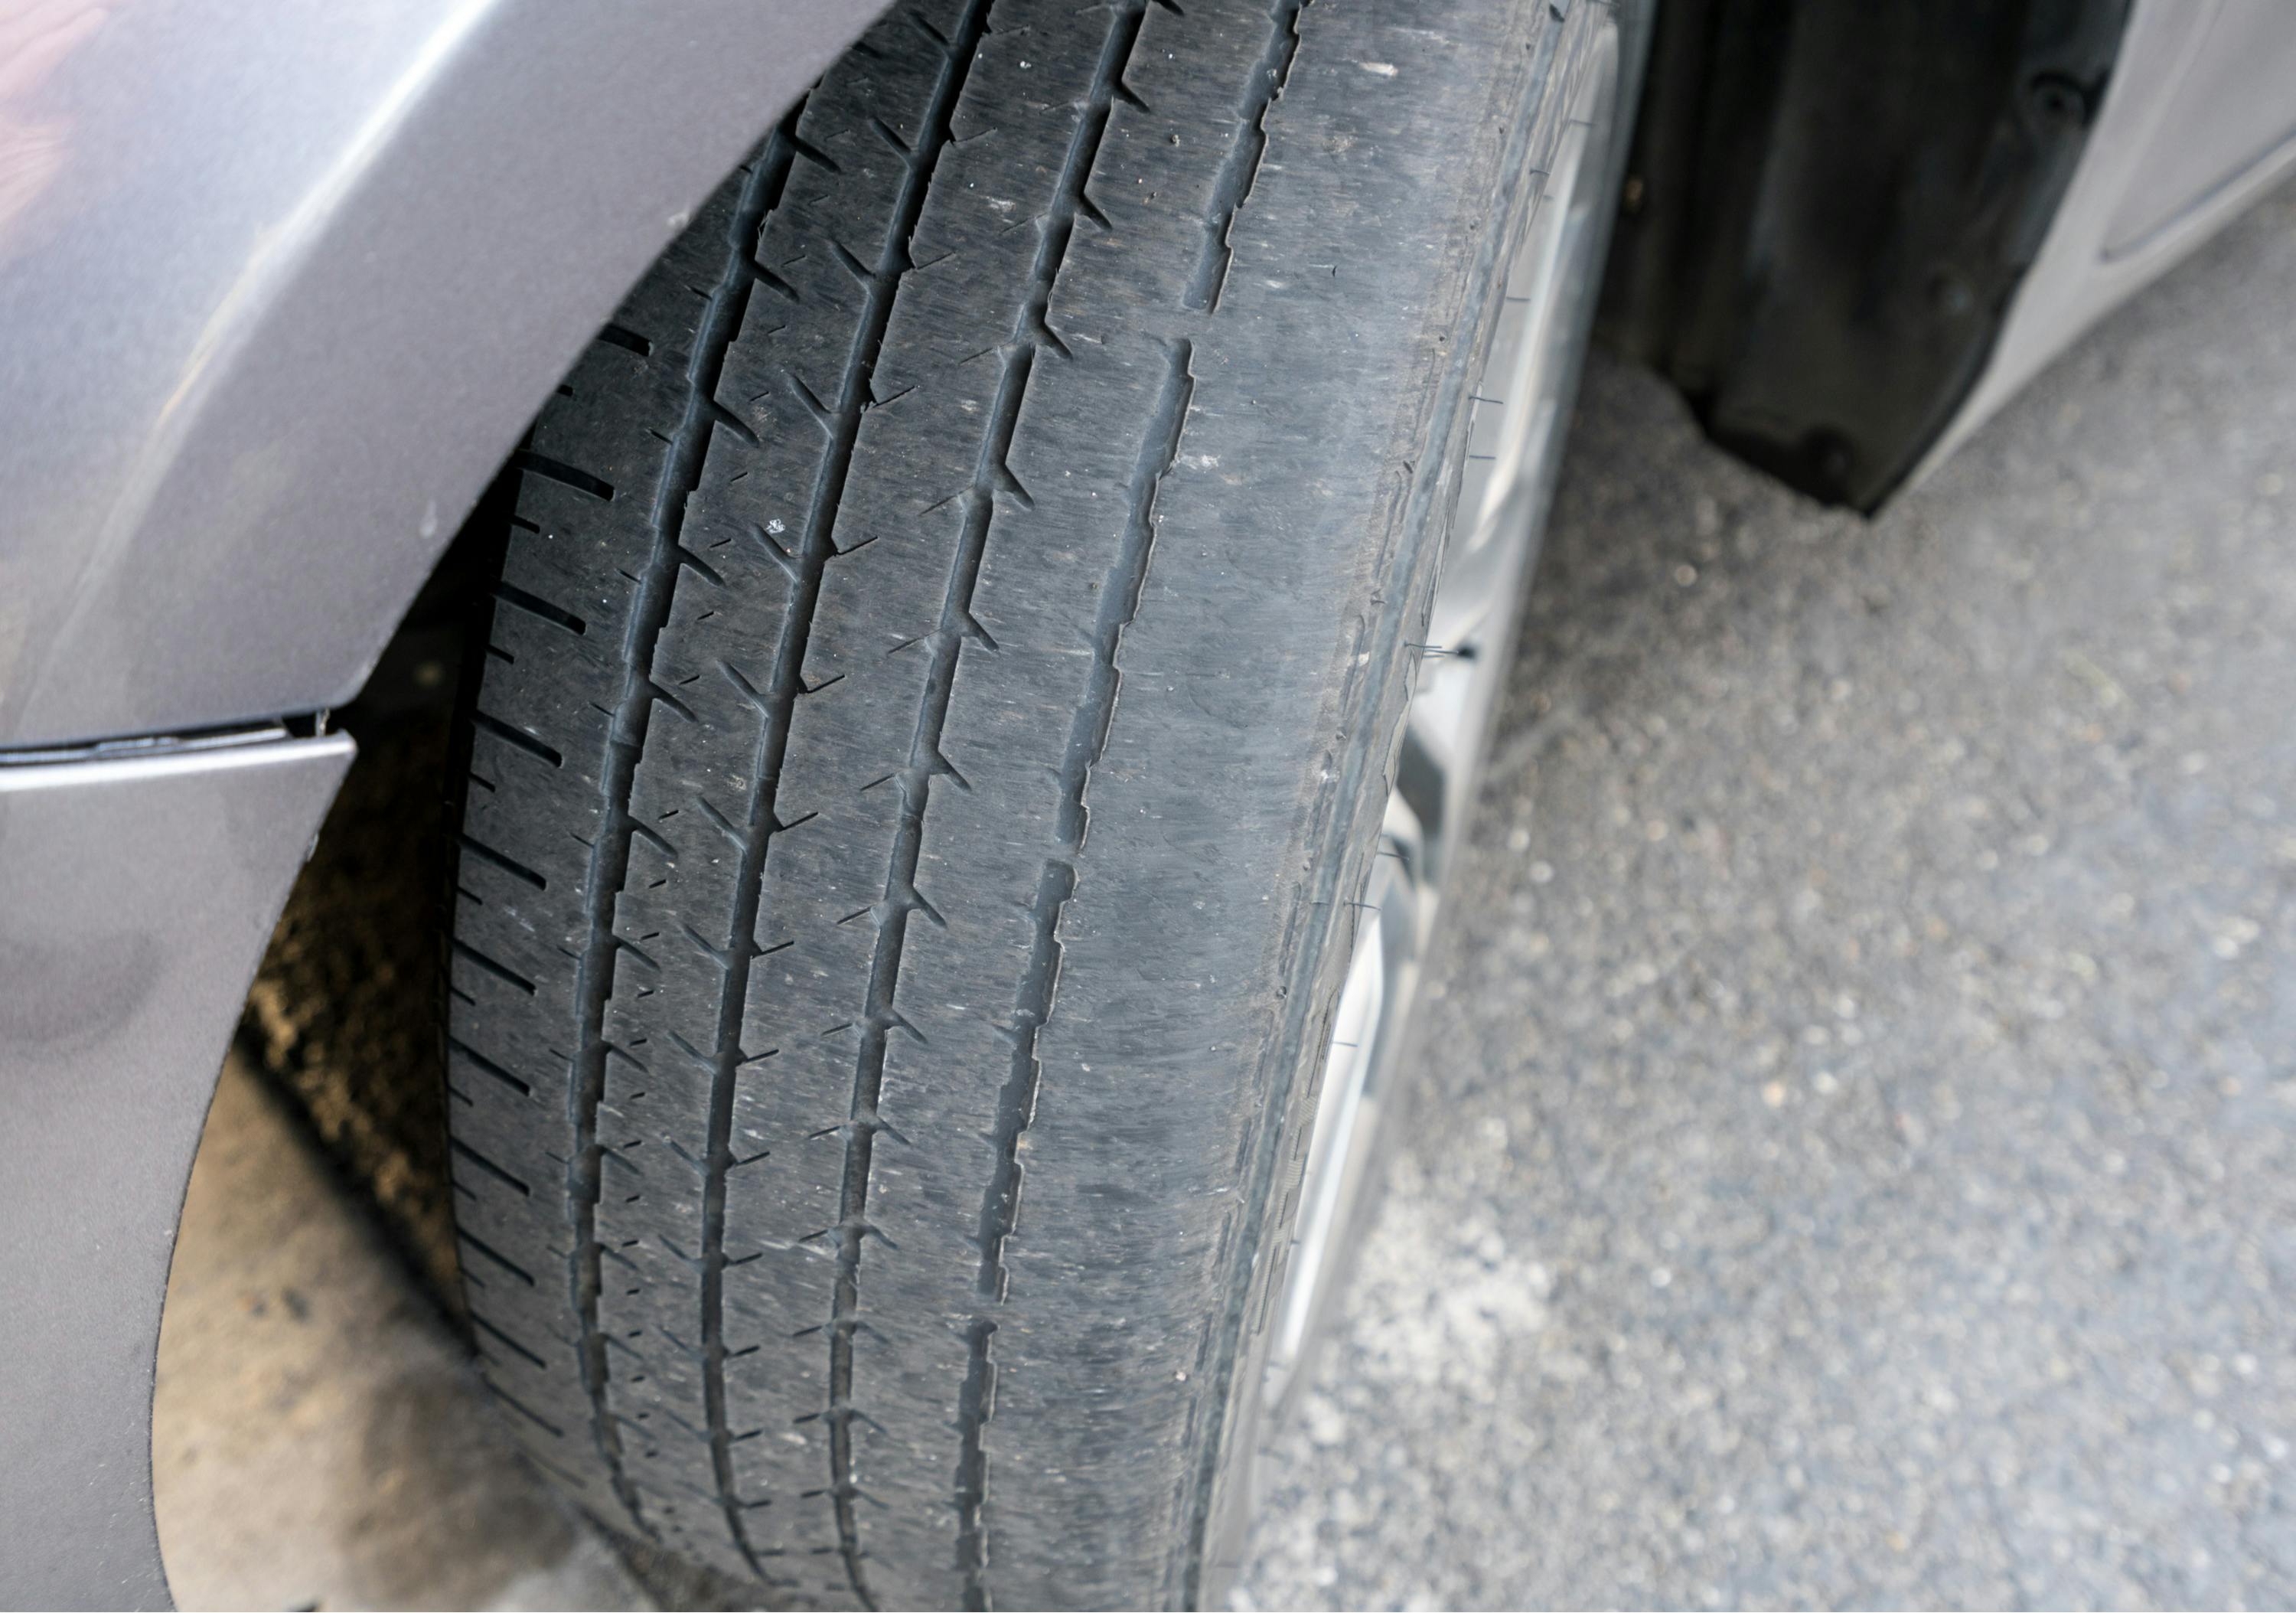 A worn car tyre caused by excessive wheel alignment toe-in